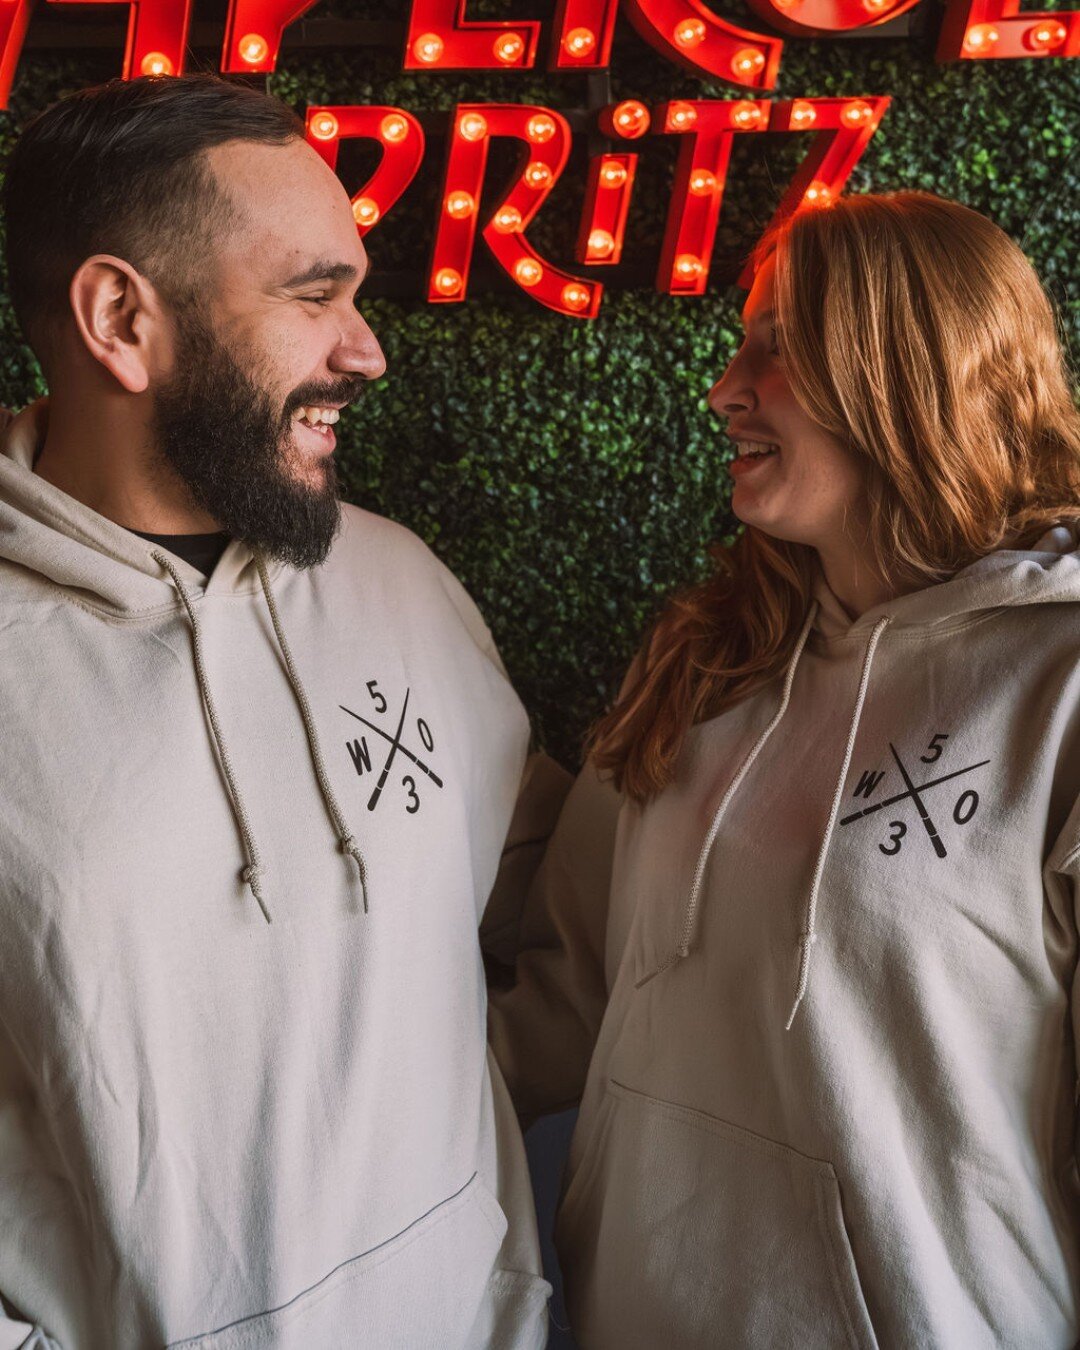 You know what's useful in a snow storm? Our warm 503W hoodies! Stop in for a drink, a snack, and a sweatshirt 😉 and prep for this snowstorm that's rolling in!